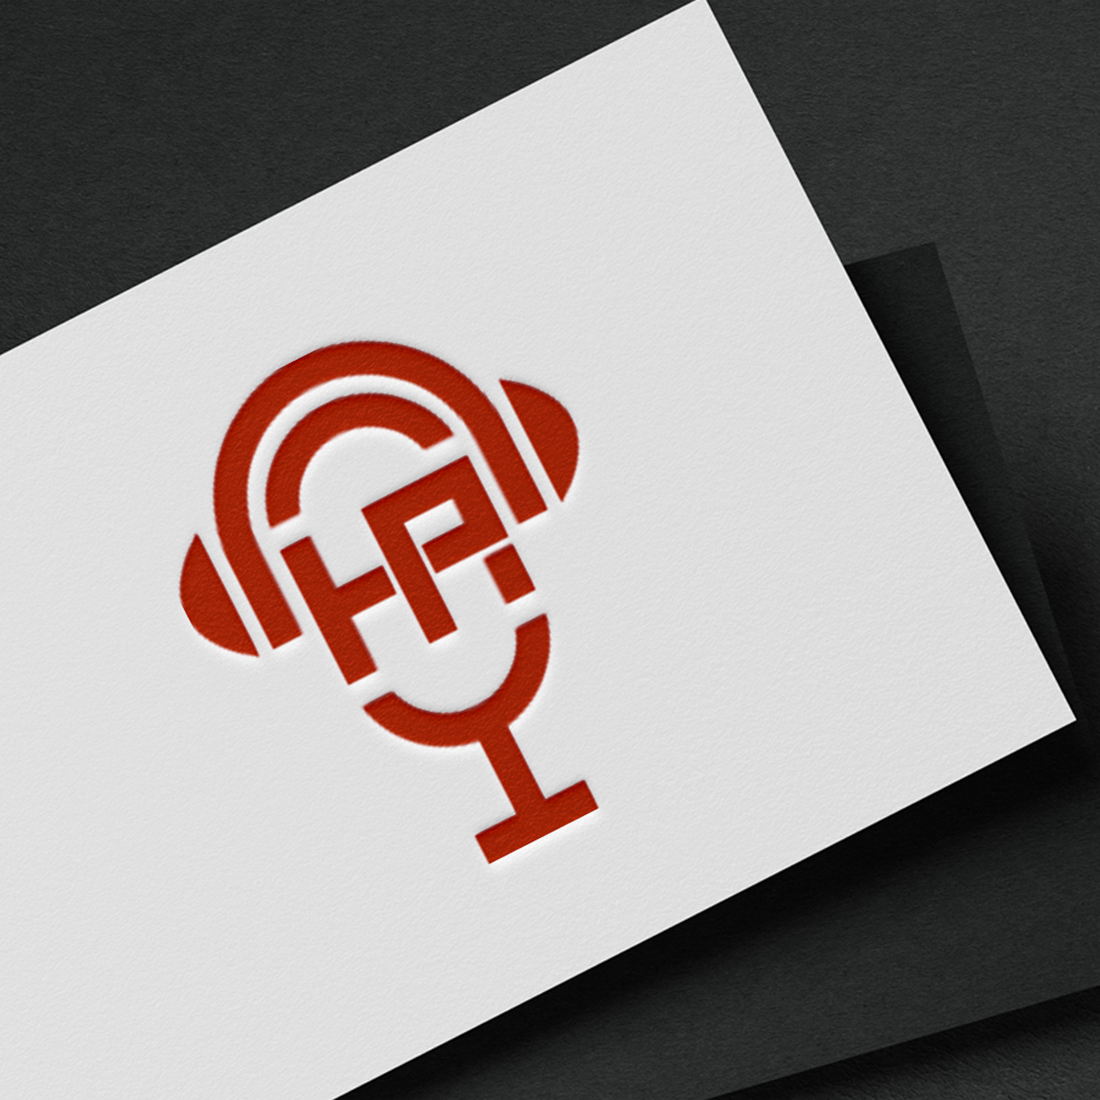 HP Radio Technology Logo Design Template cover image.